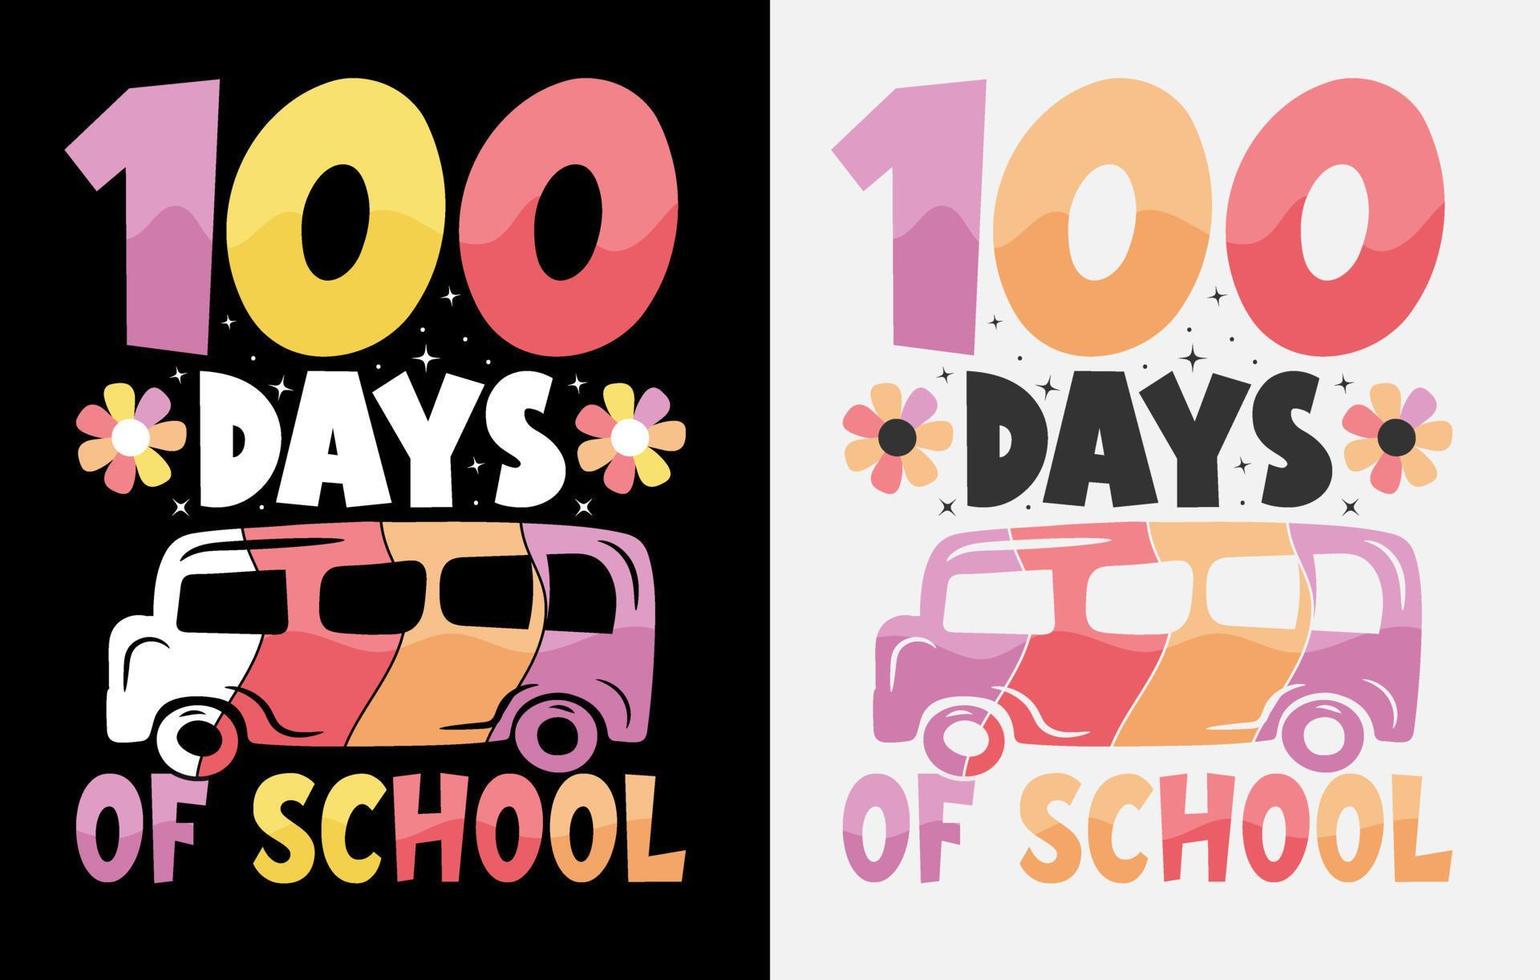 100th day t shirt free, 100 days of school t-shirts, 100th day t shirt , Happy 100 days tshirt, teacher t shirt, vector